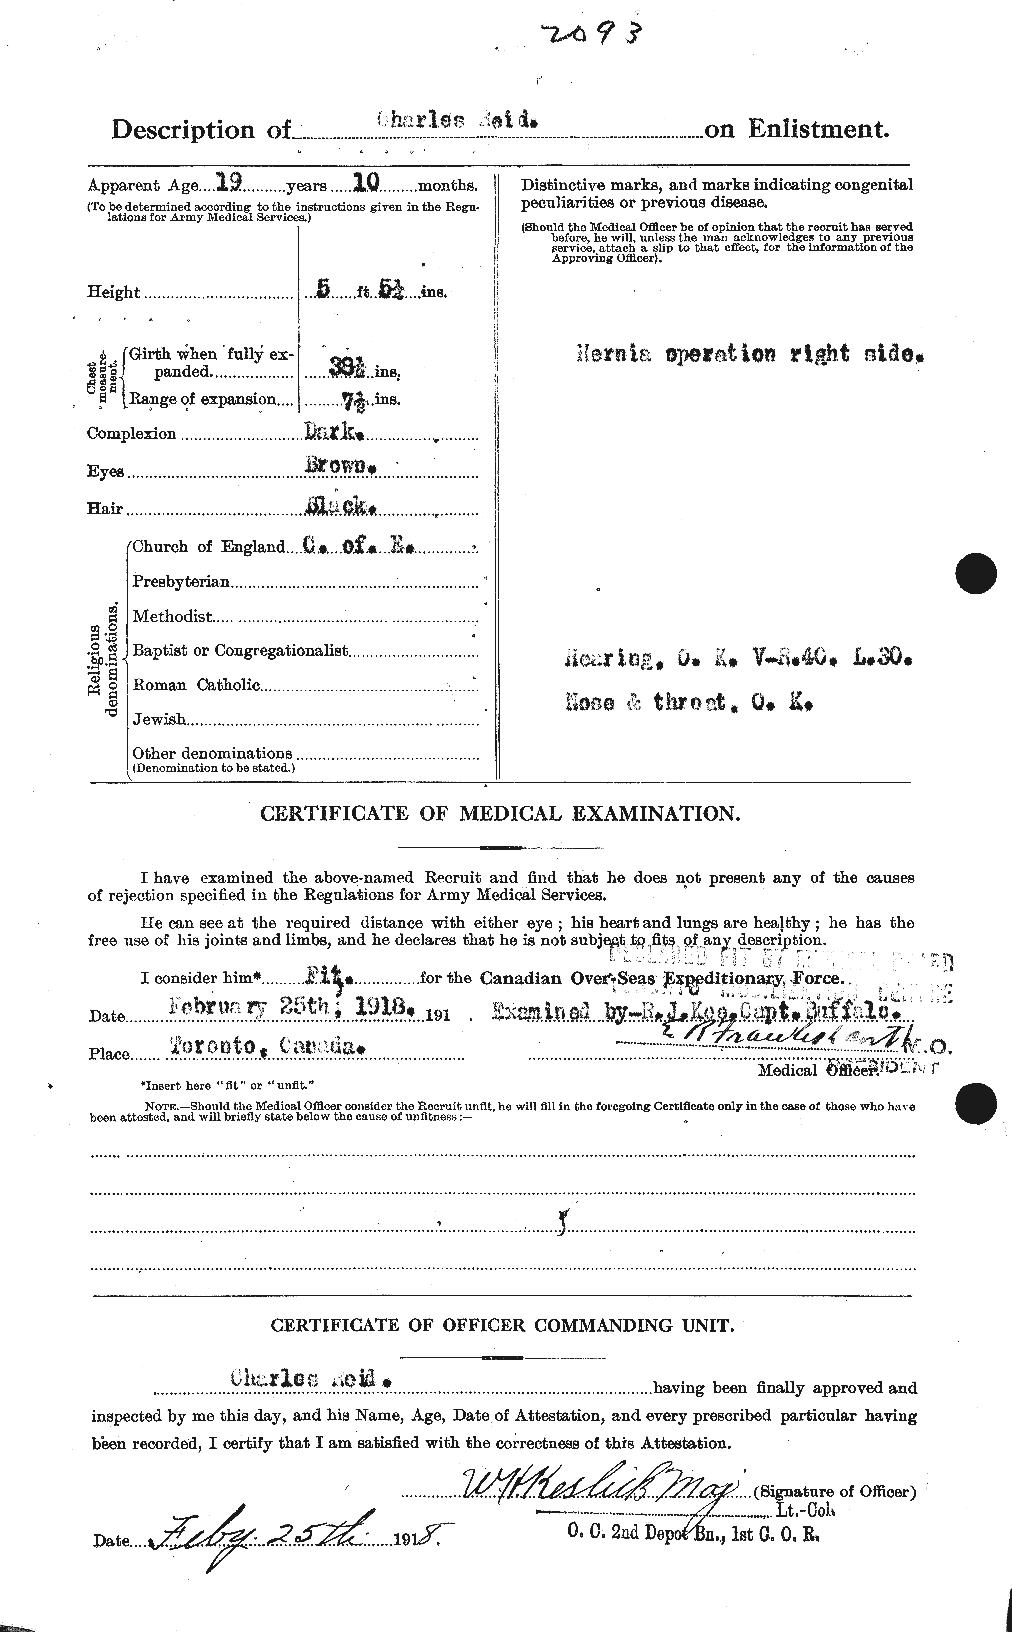 Personnel Records of the First World War - CEF 597869b